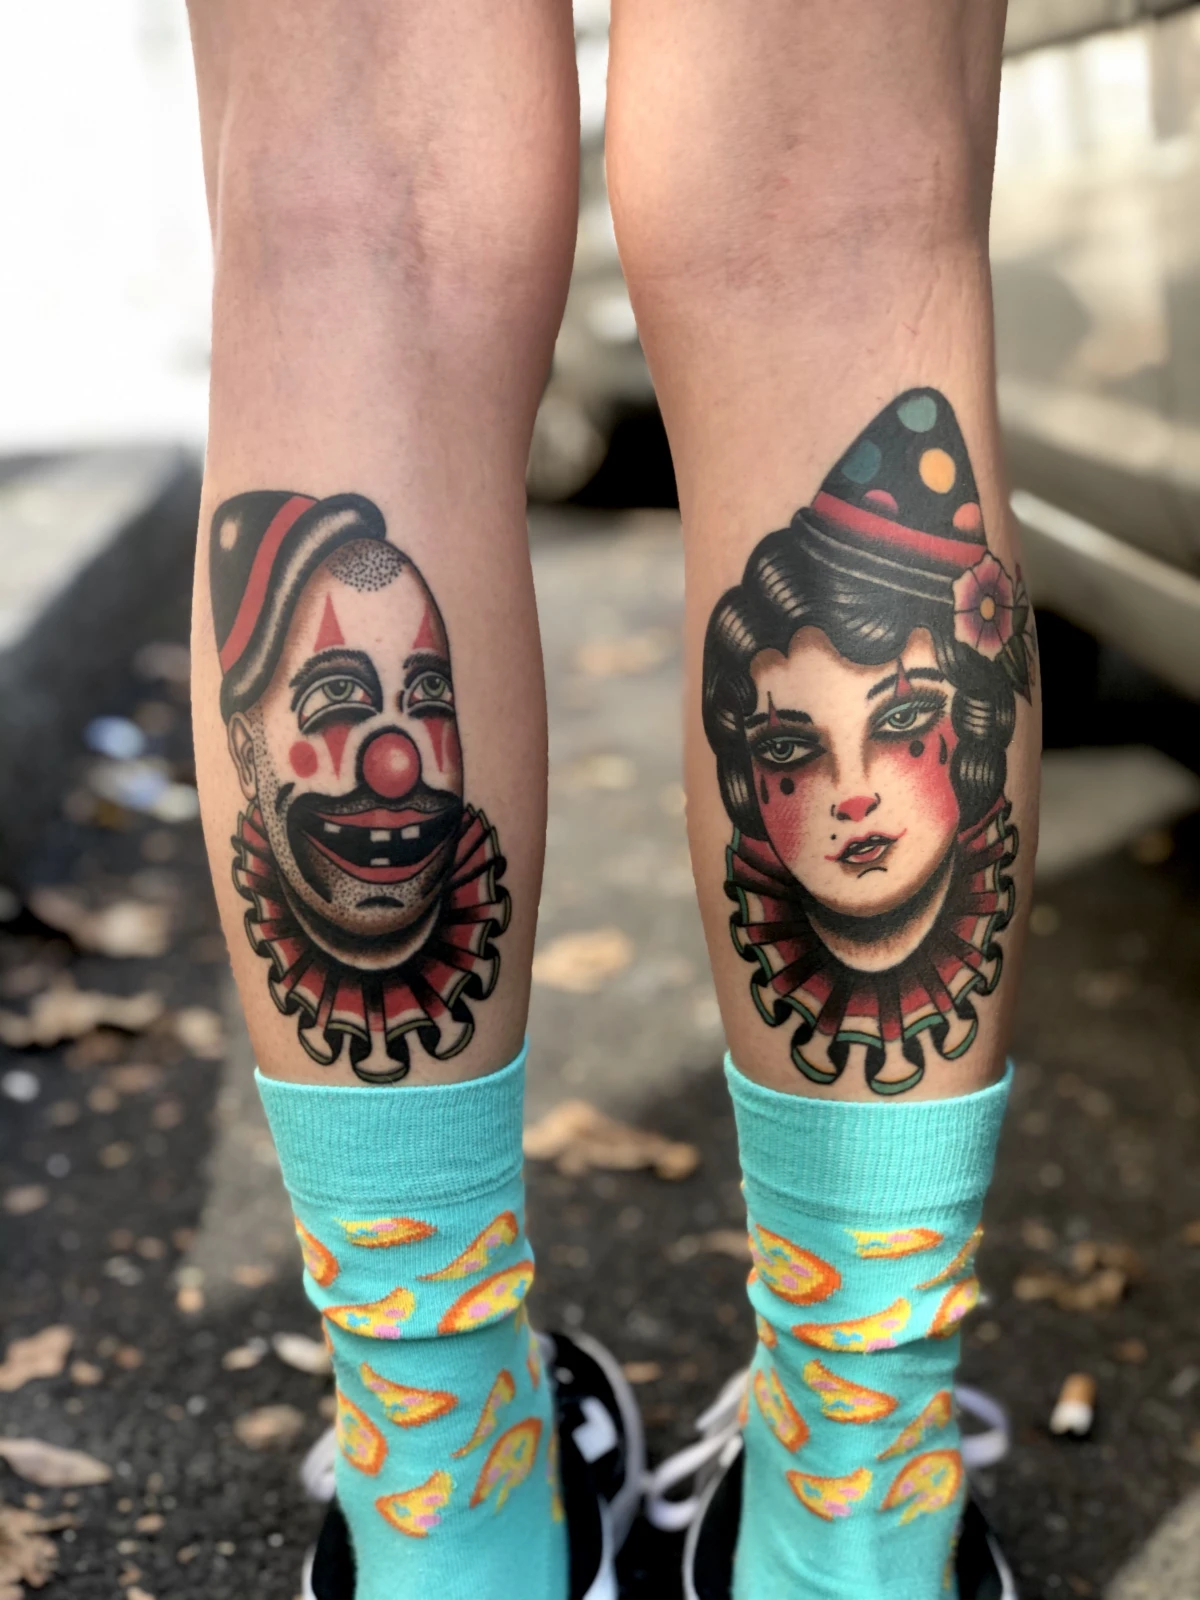 tattoos with hidden meaning clown tattoo on legs